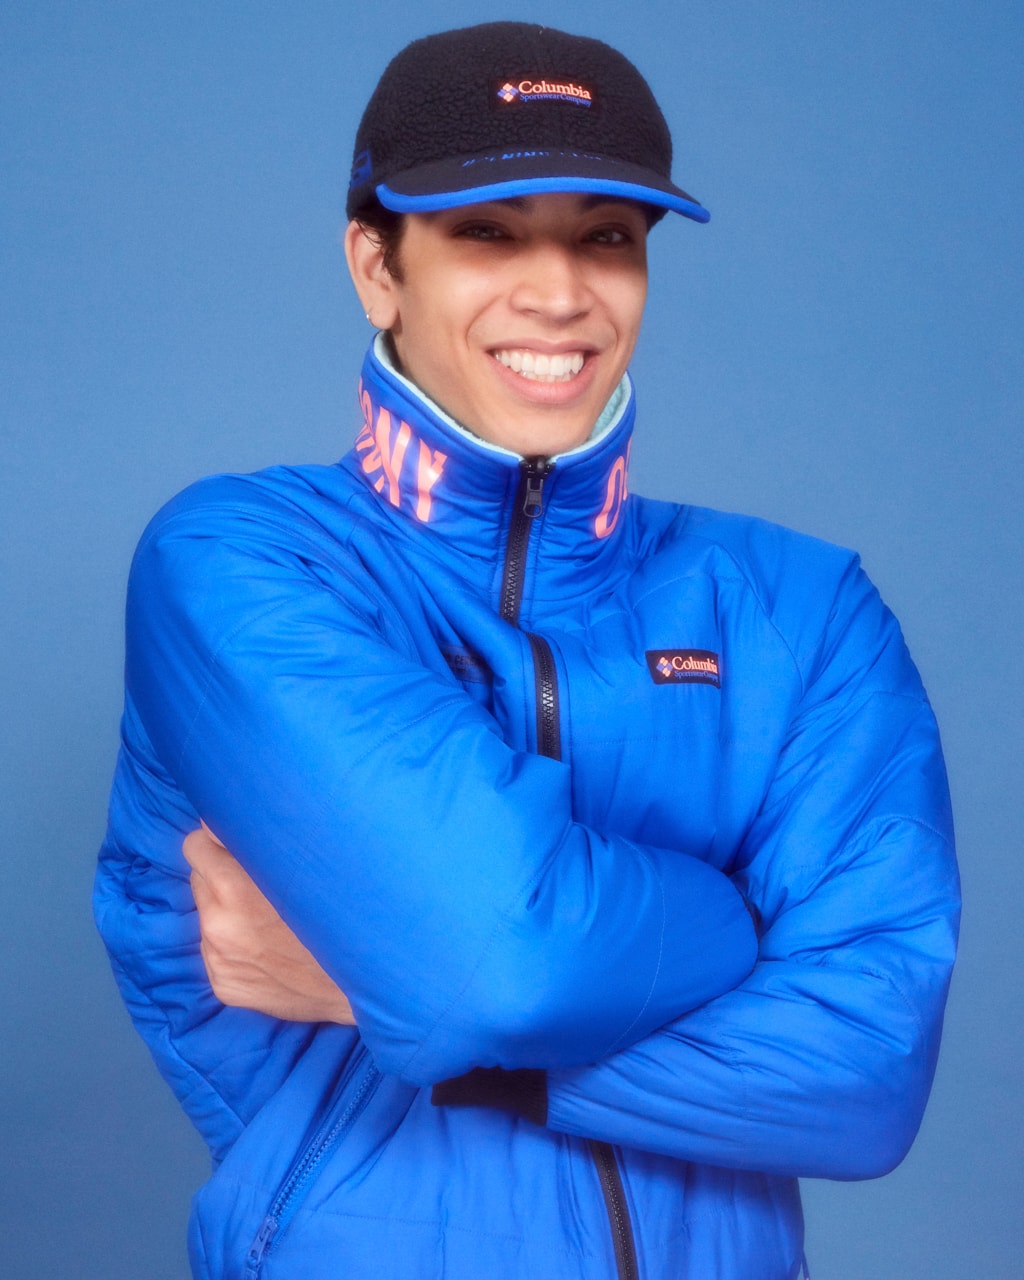 Columbia for Opening Ceremony Fall 2018 winter collection columbia sportswear fleece outerwear jacket release date price 